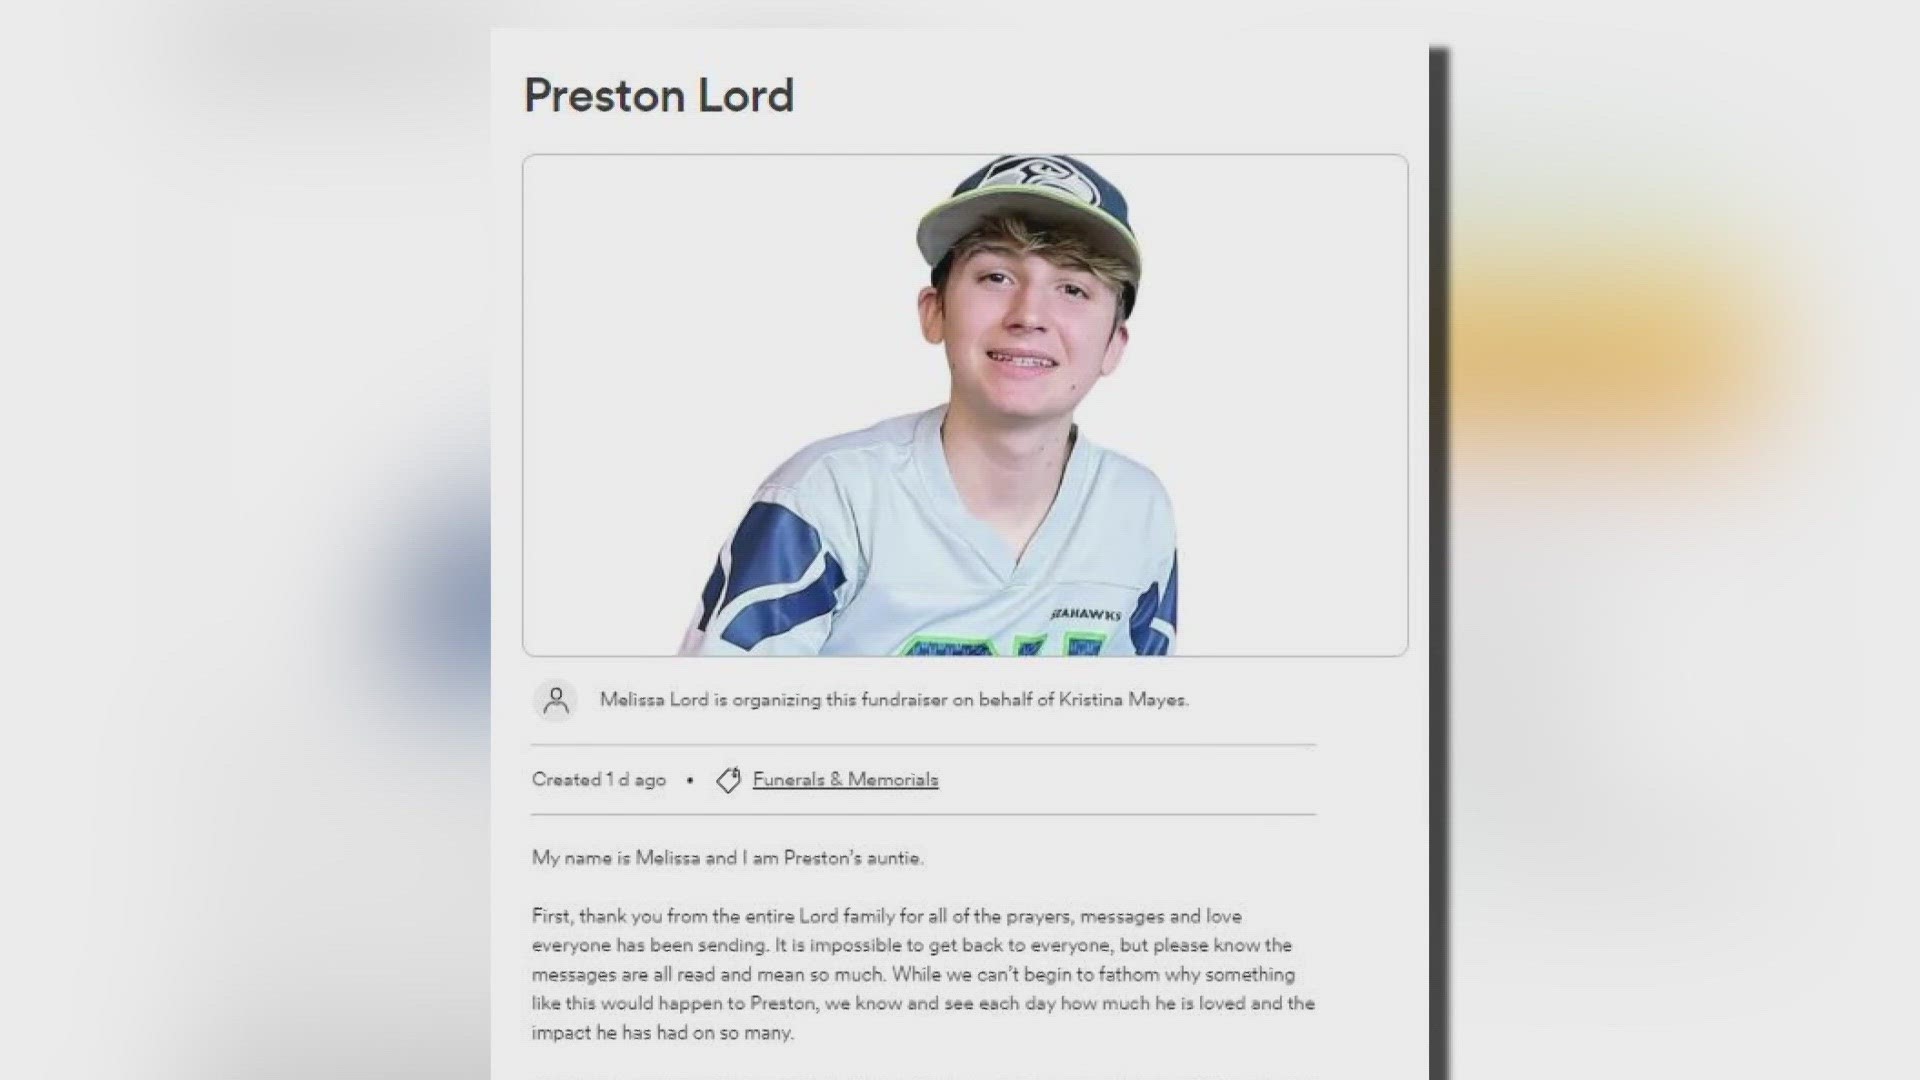 A candlelight vigil will be held Thursday night for Preston Lord, who died after being assaulted at a large Halloween party.